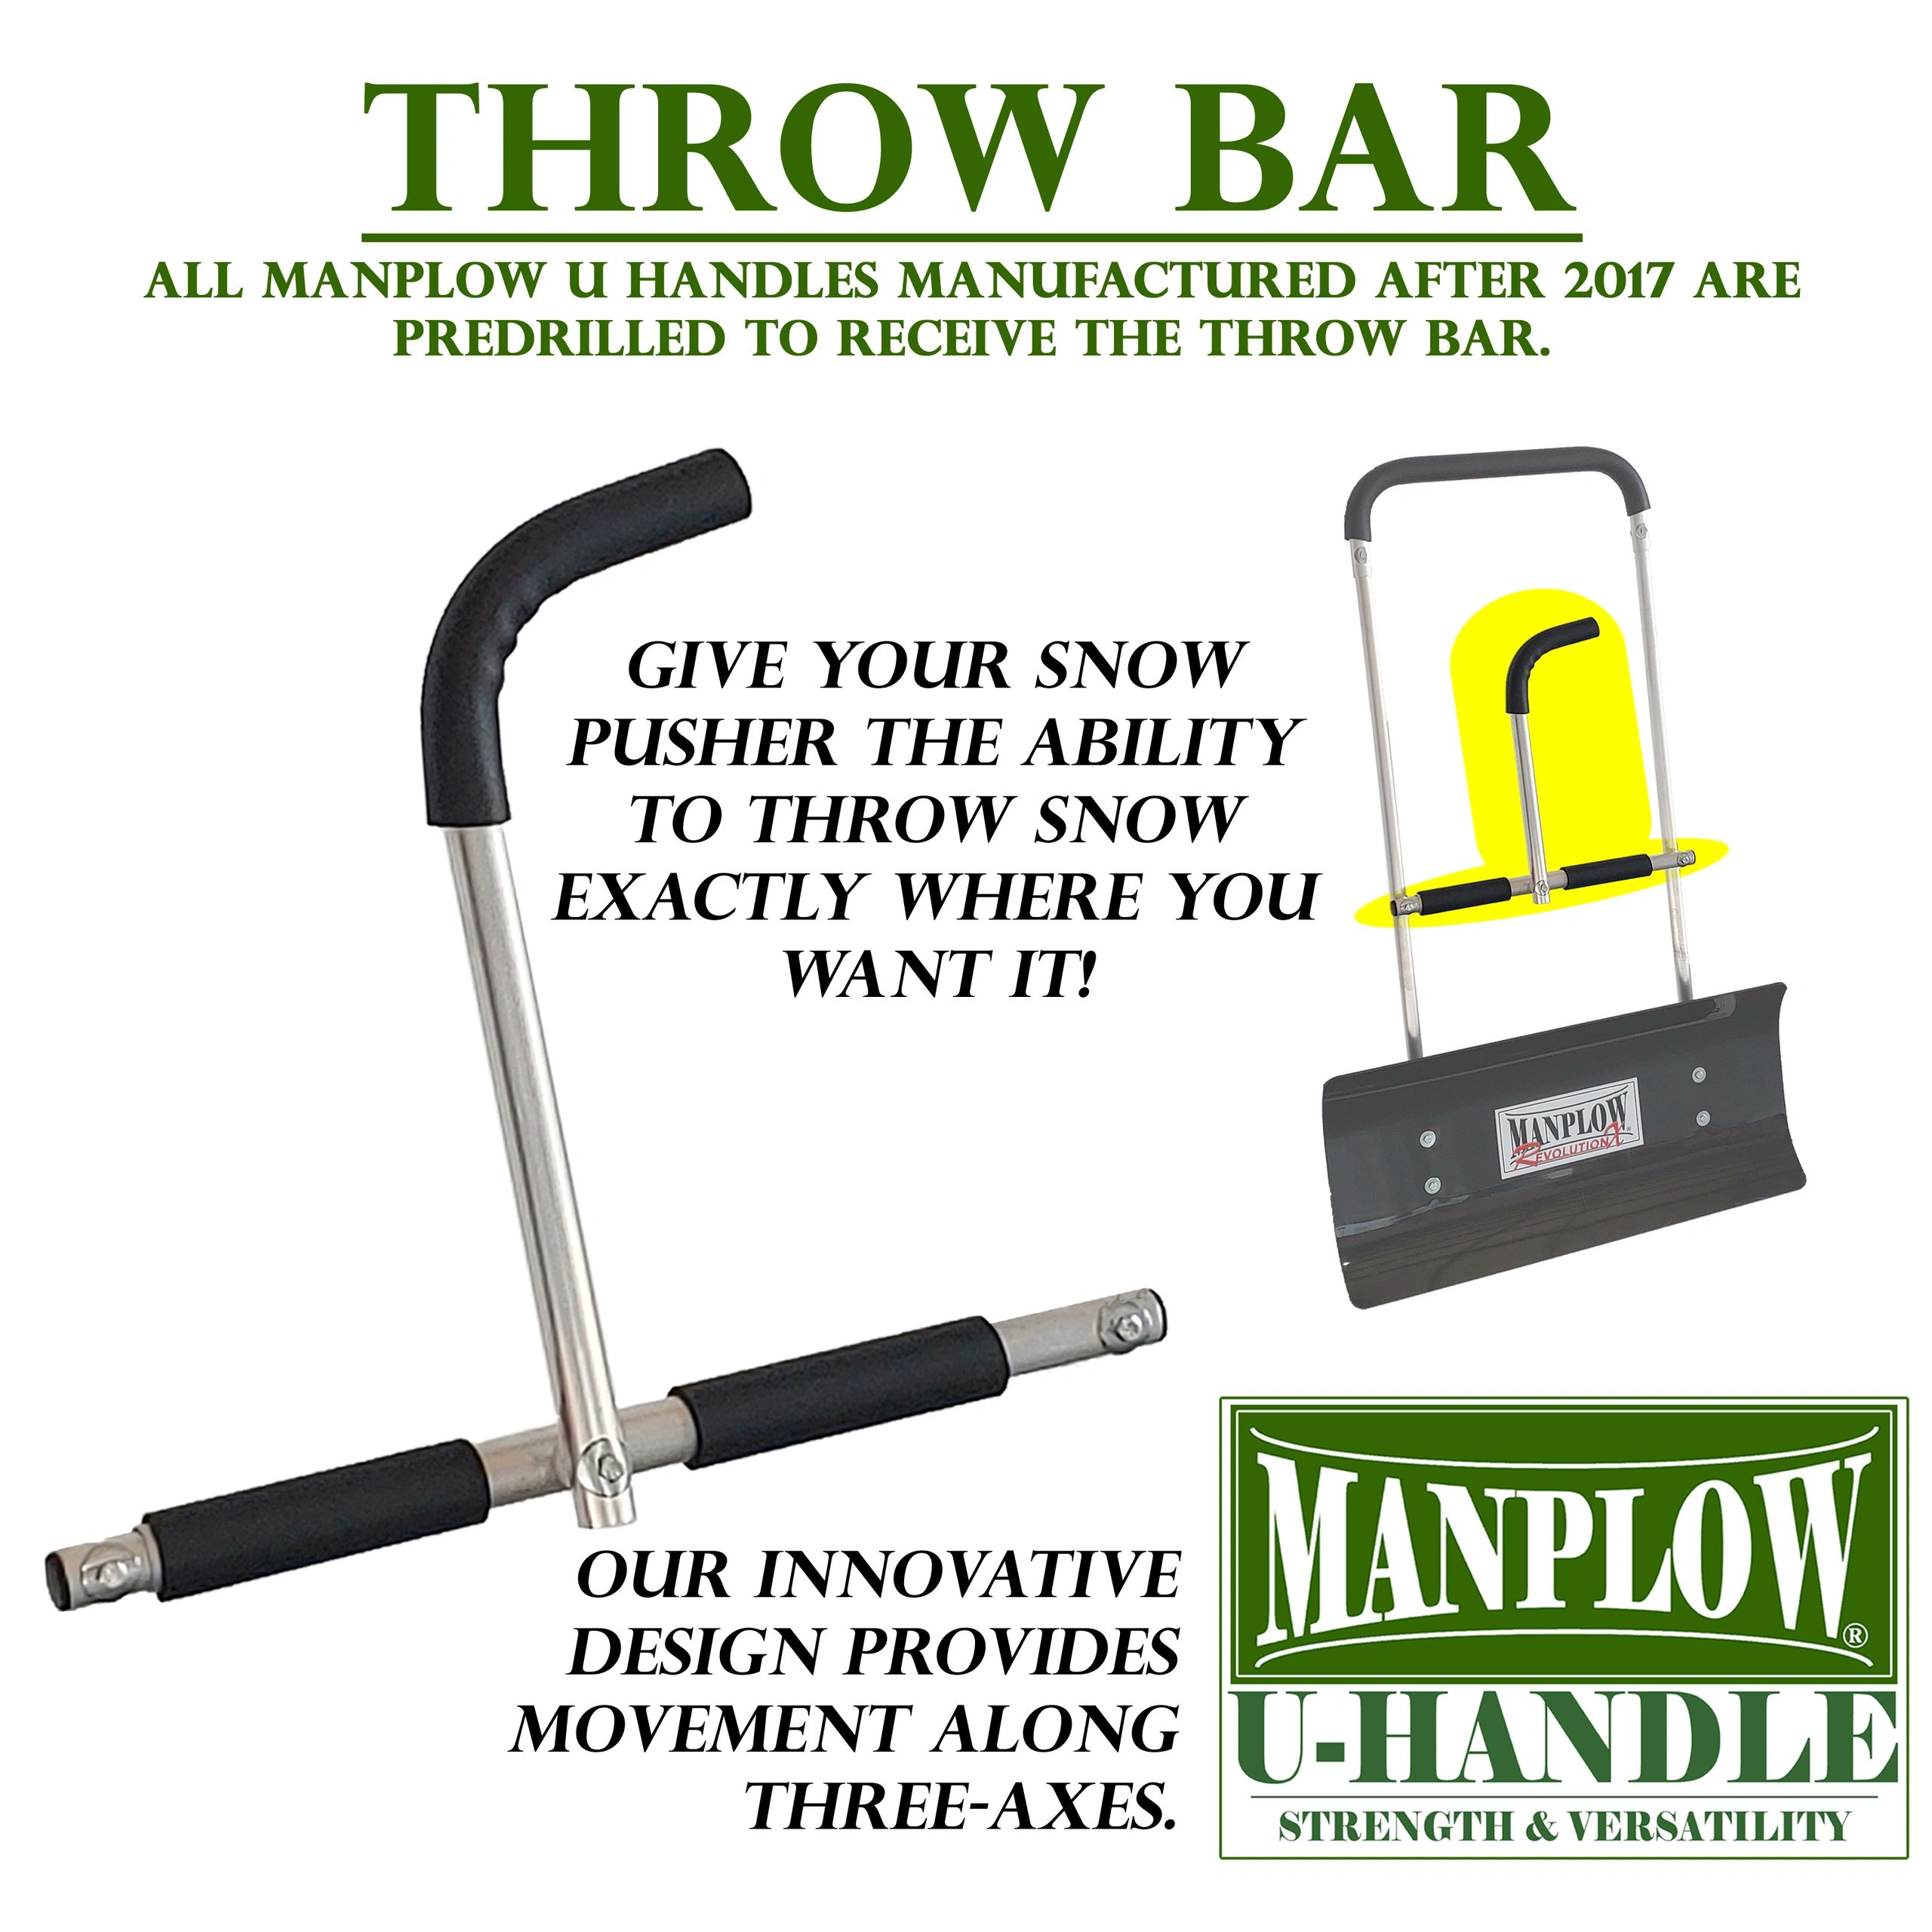 MANPLOW PRO32 Pro Snow Pusher 32" Material Handling for sale online 